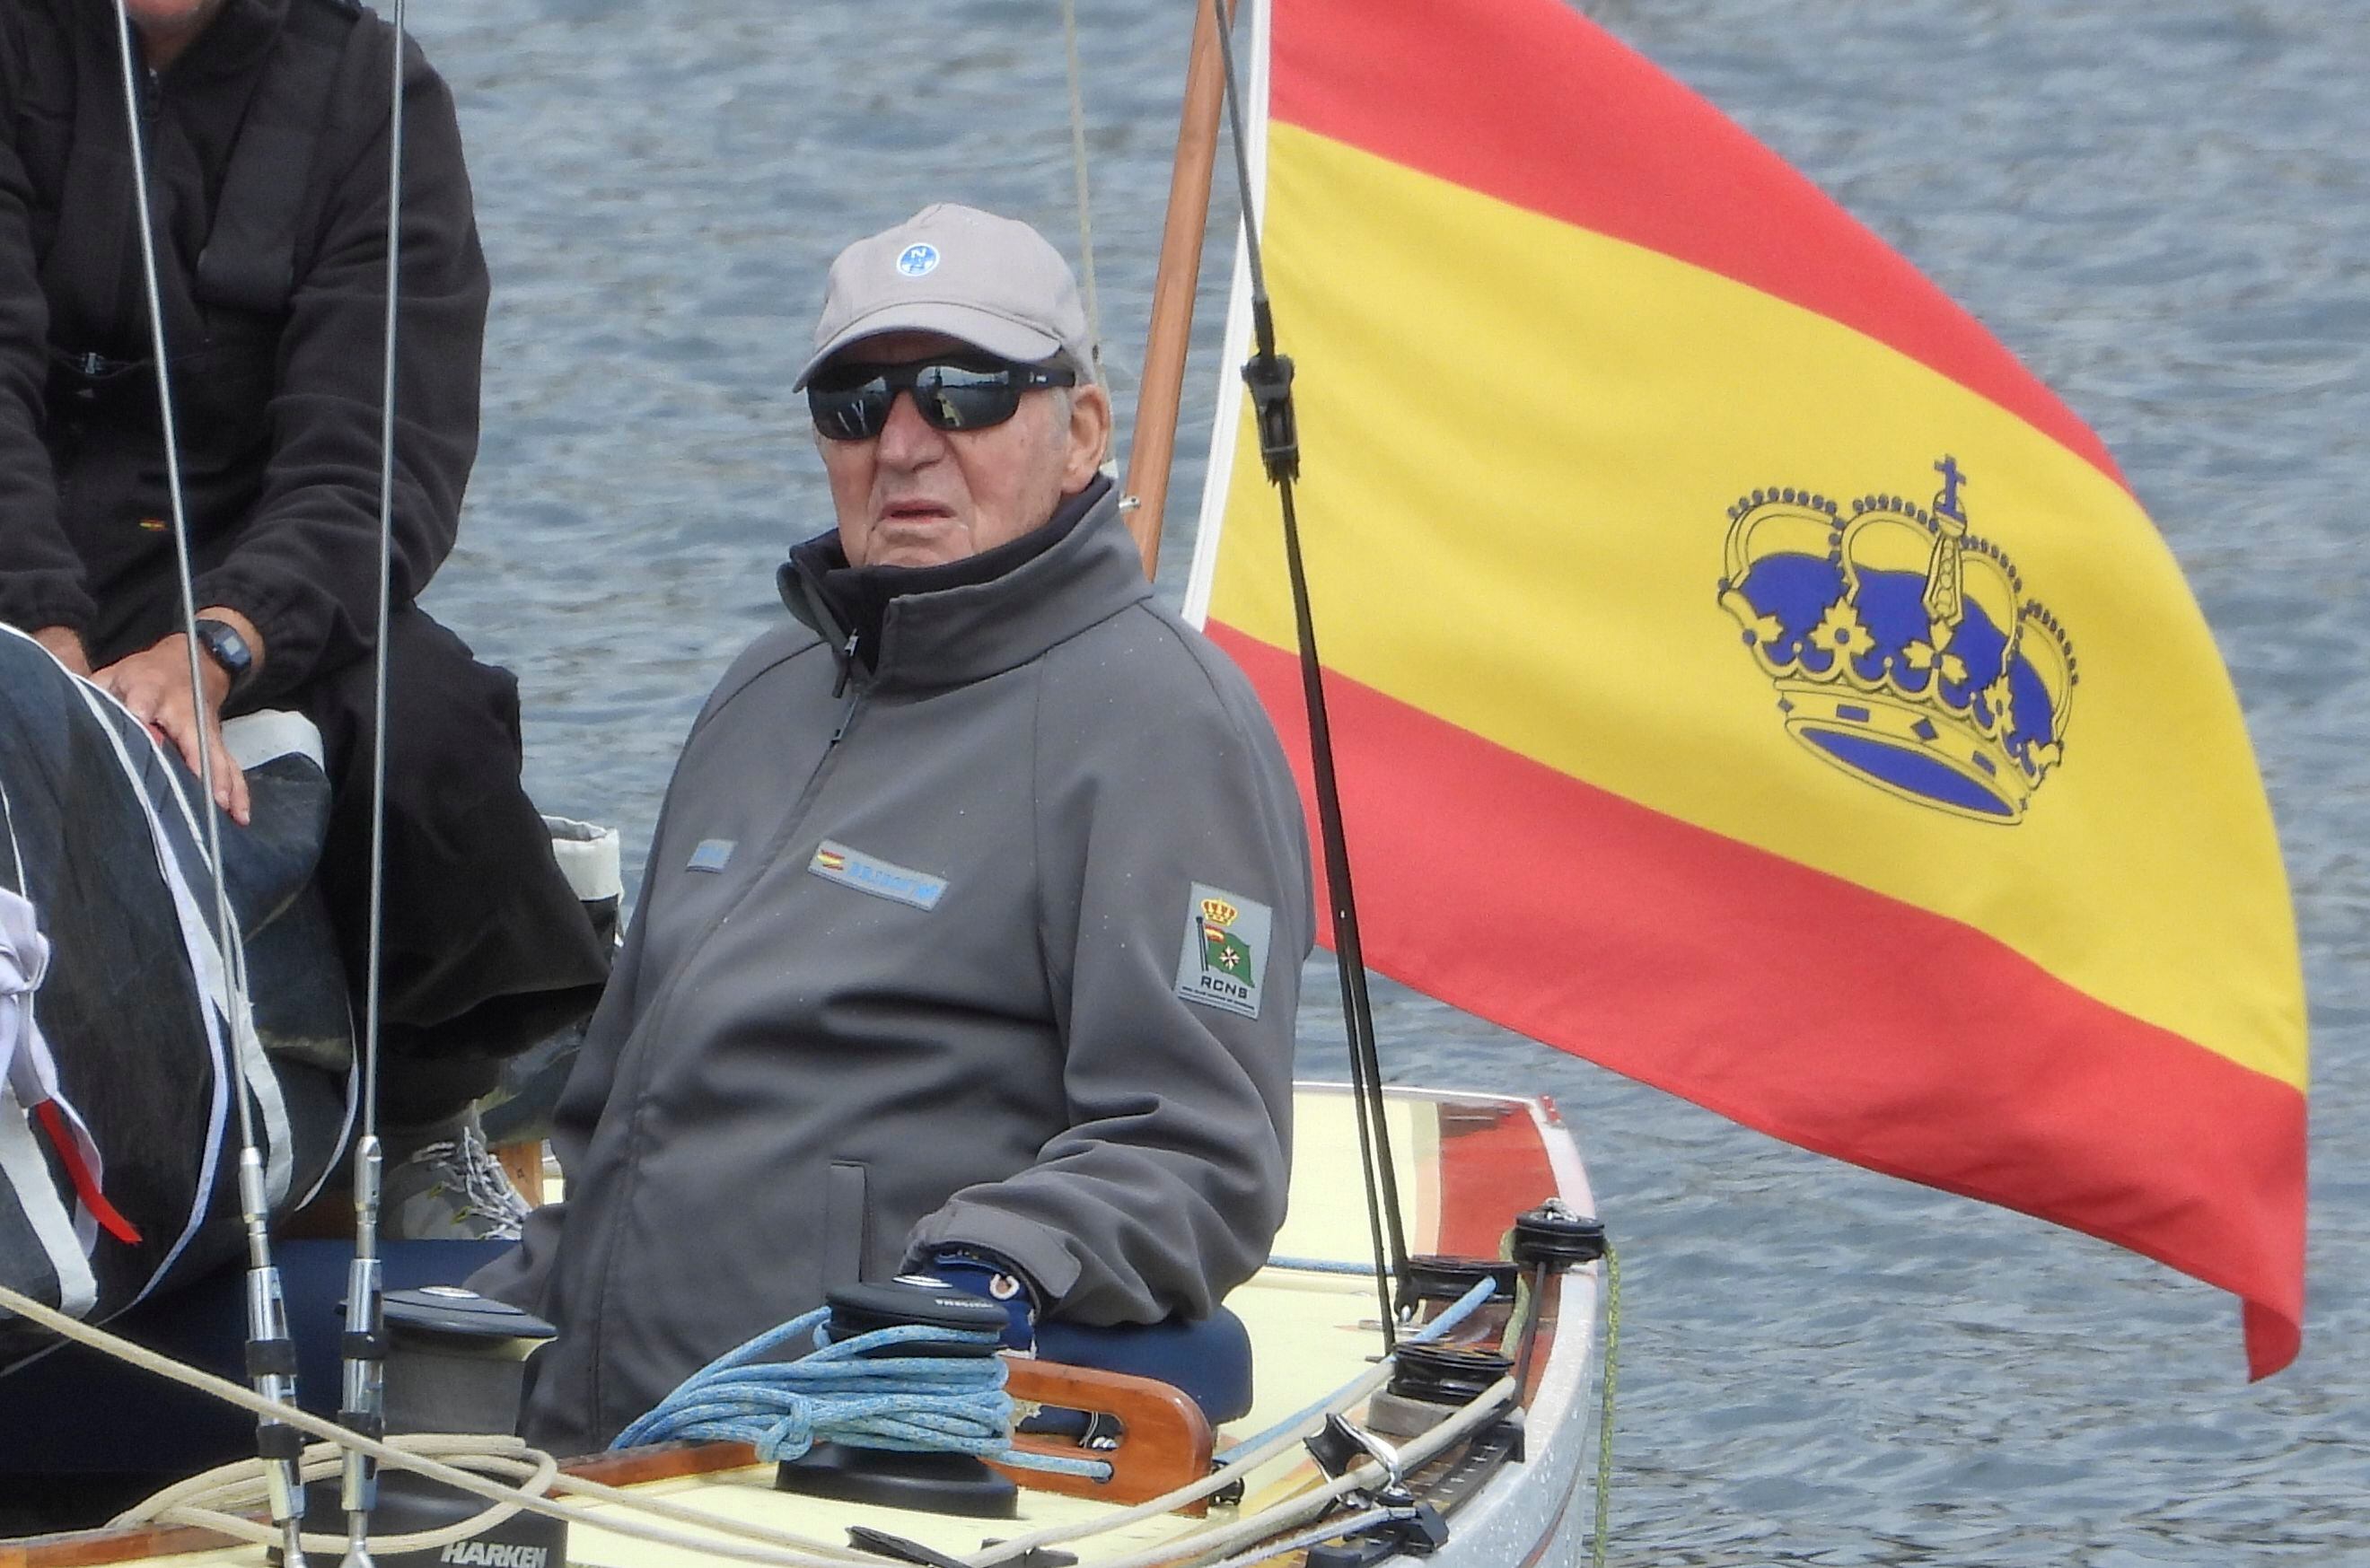 Juan Carlos I, on a recent visit to Galicia, Spain